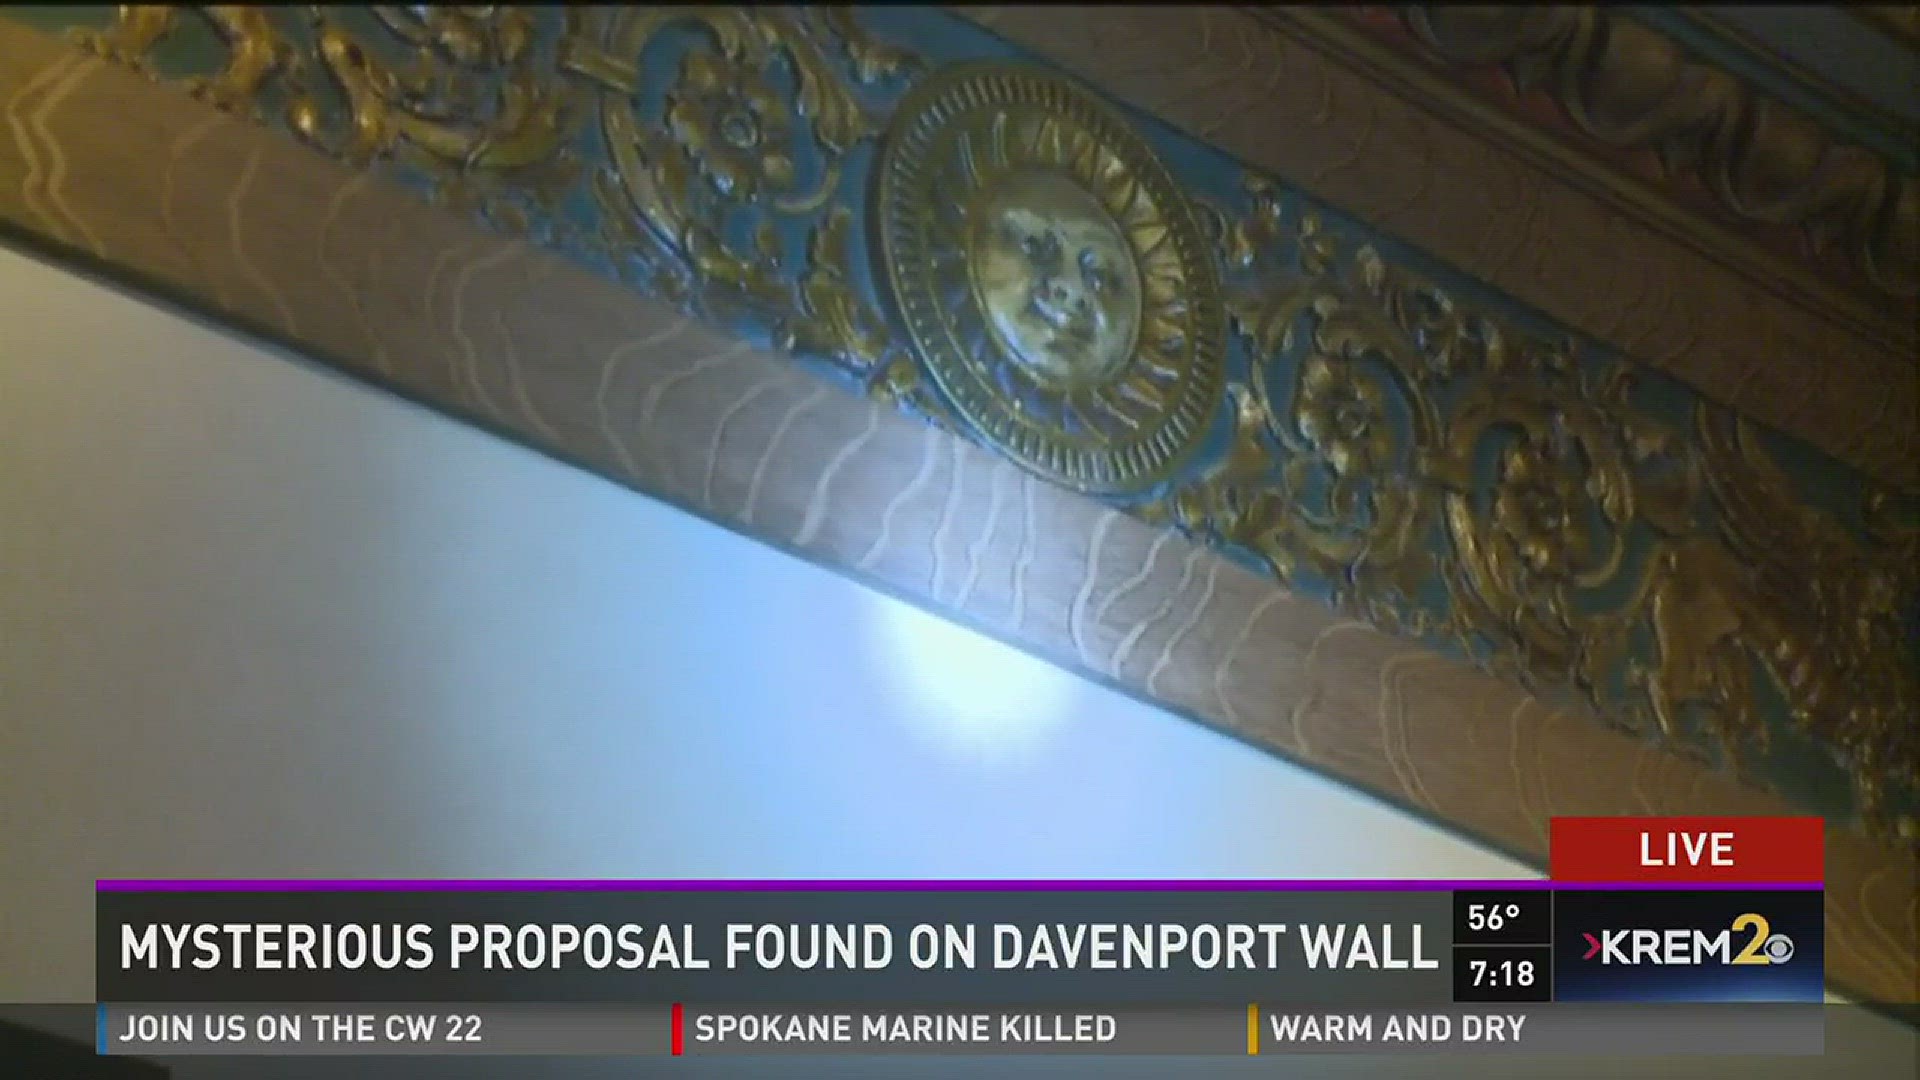 A mysterious marriage proposal is hidden on the wall in the Davenport